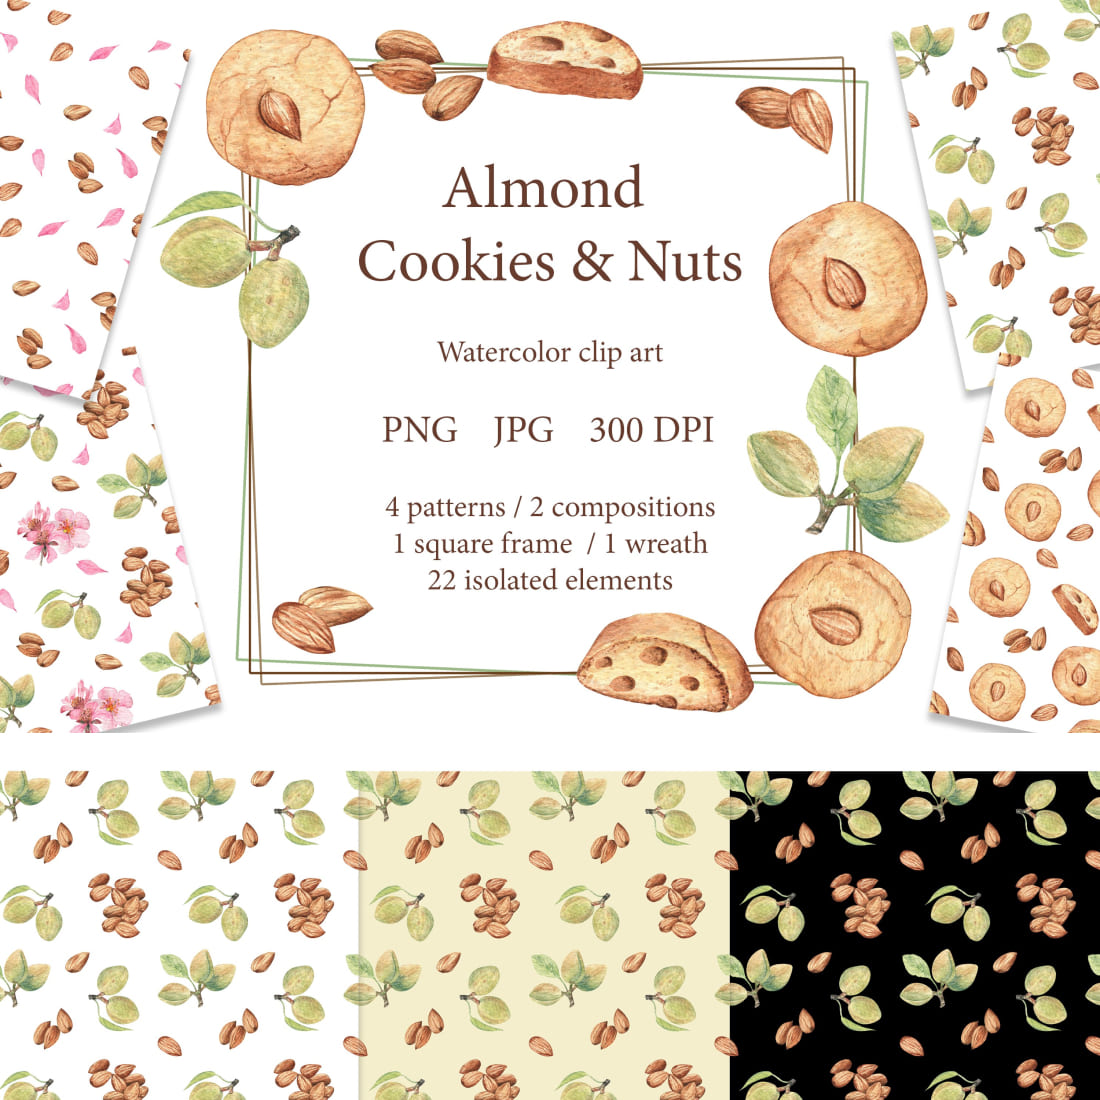 Almond Cookies and Nuts. Watercolor clip art and patterns. cover.